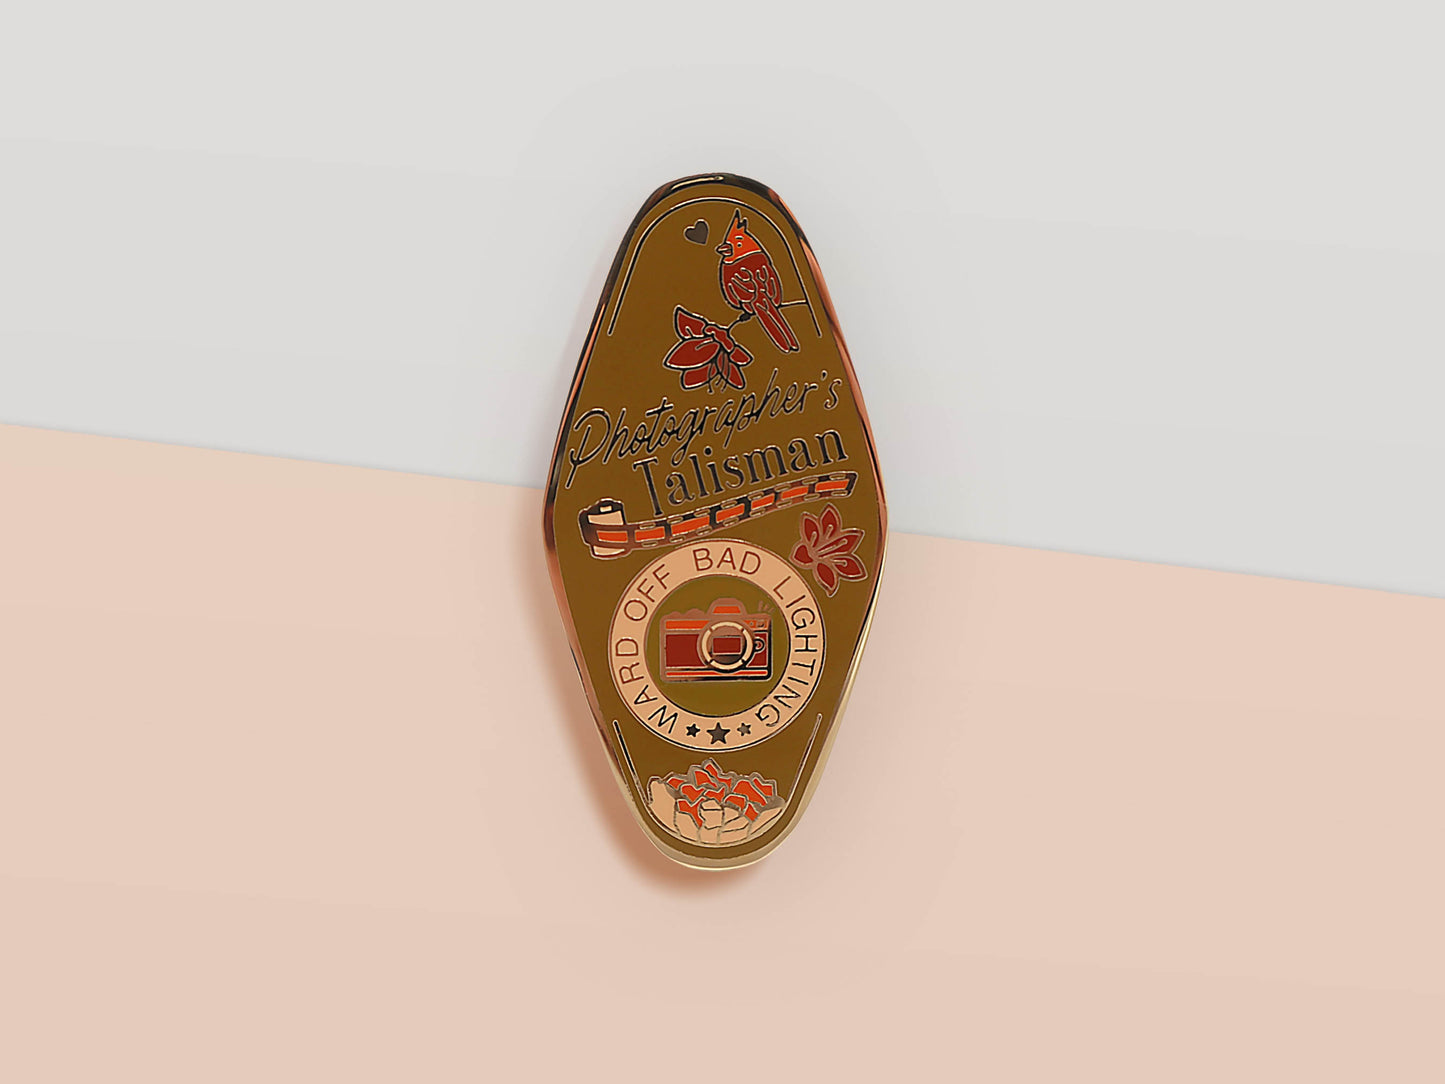 Gold Enamel Talisman Pin with brown design and the words Photographer's Talisman, Ward of bad lighting. The pins design includes a camera and a film, a red bird, as well as flowers and crystals.